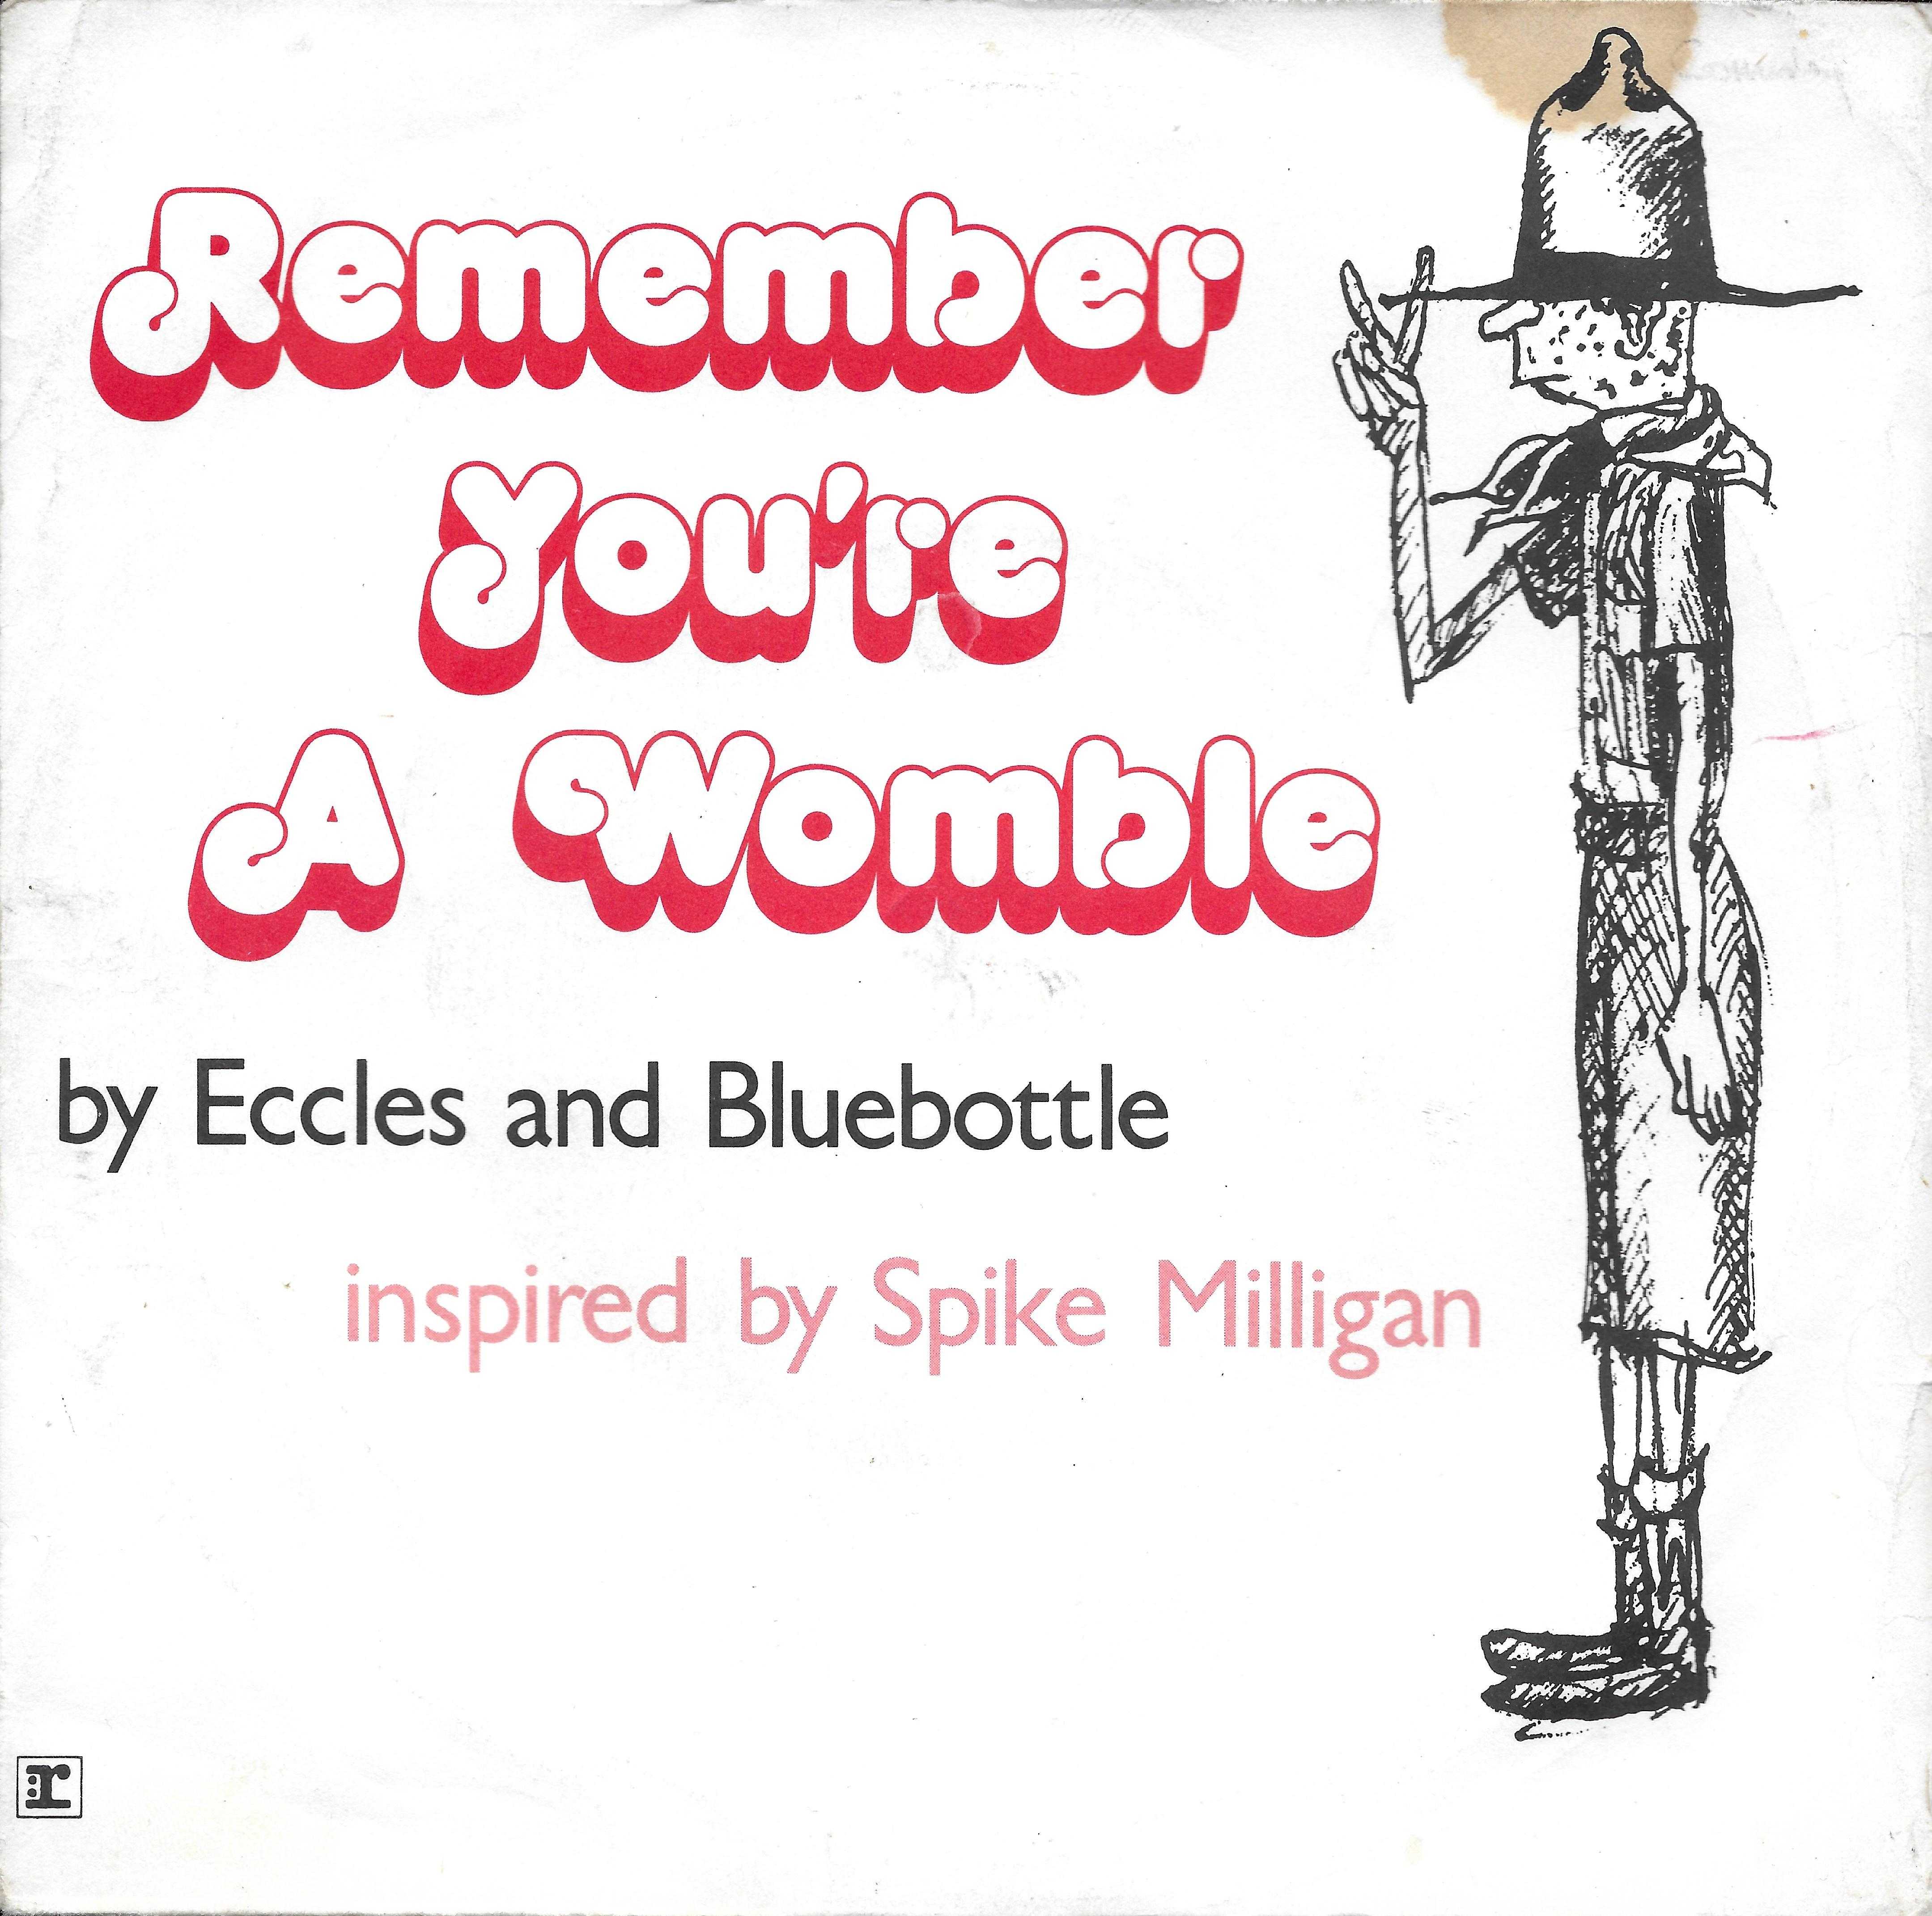 Picture of Remember you're a Womble by artist Mike Batt / The Goons from the BBC singles - Records and Tapes library